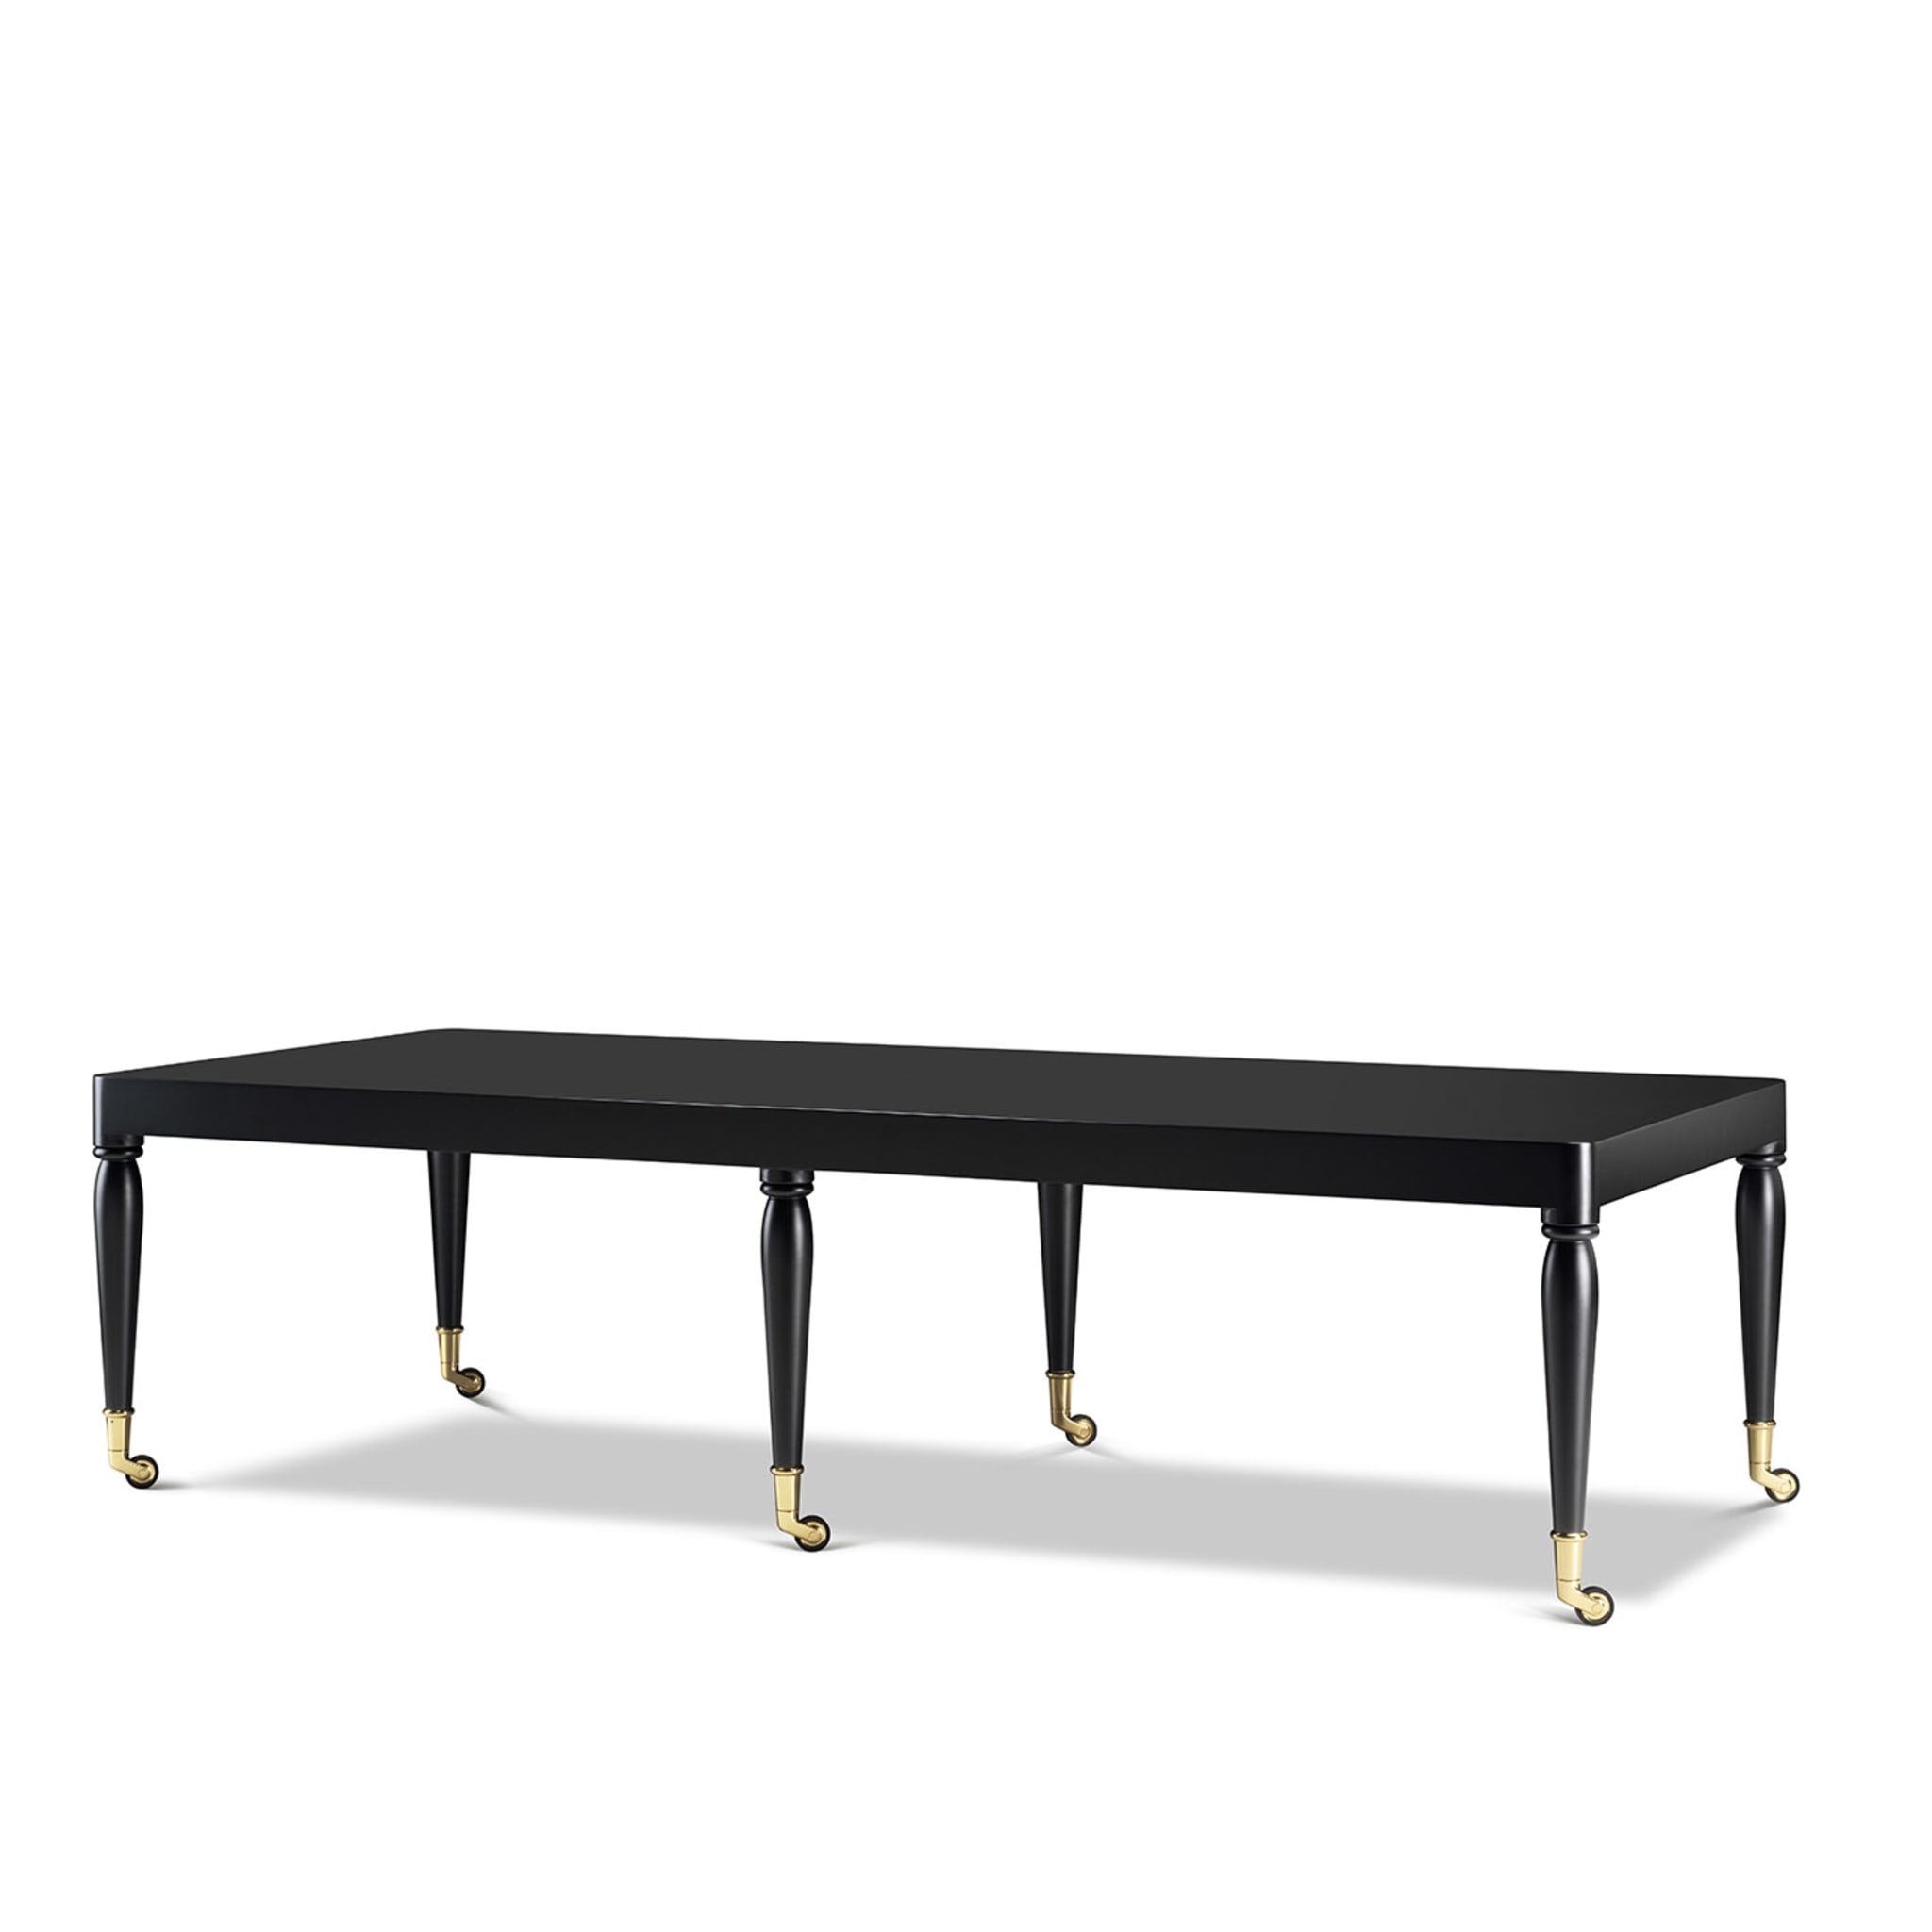 Shaker Black Dining Table by Stefano Giovannoni - Alternative view 5